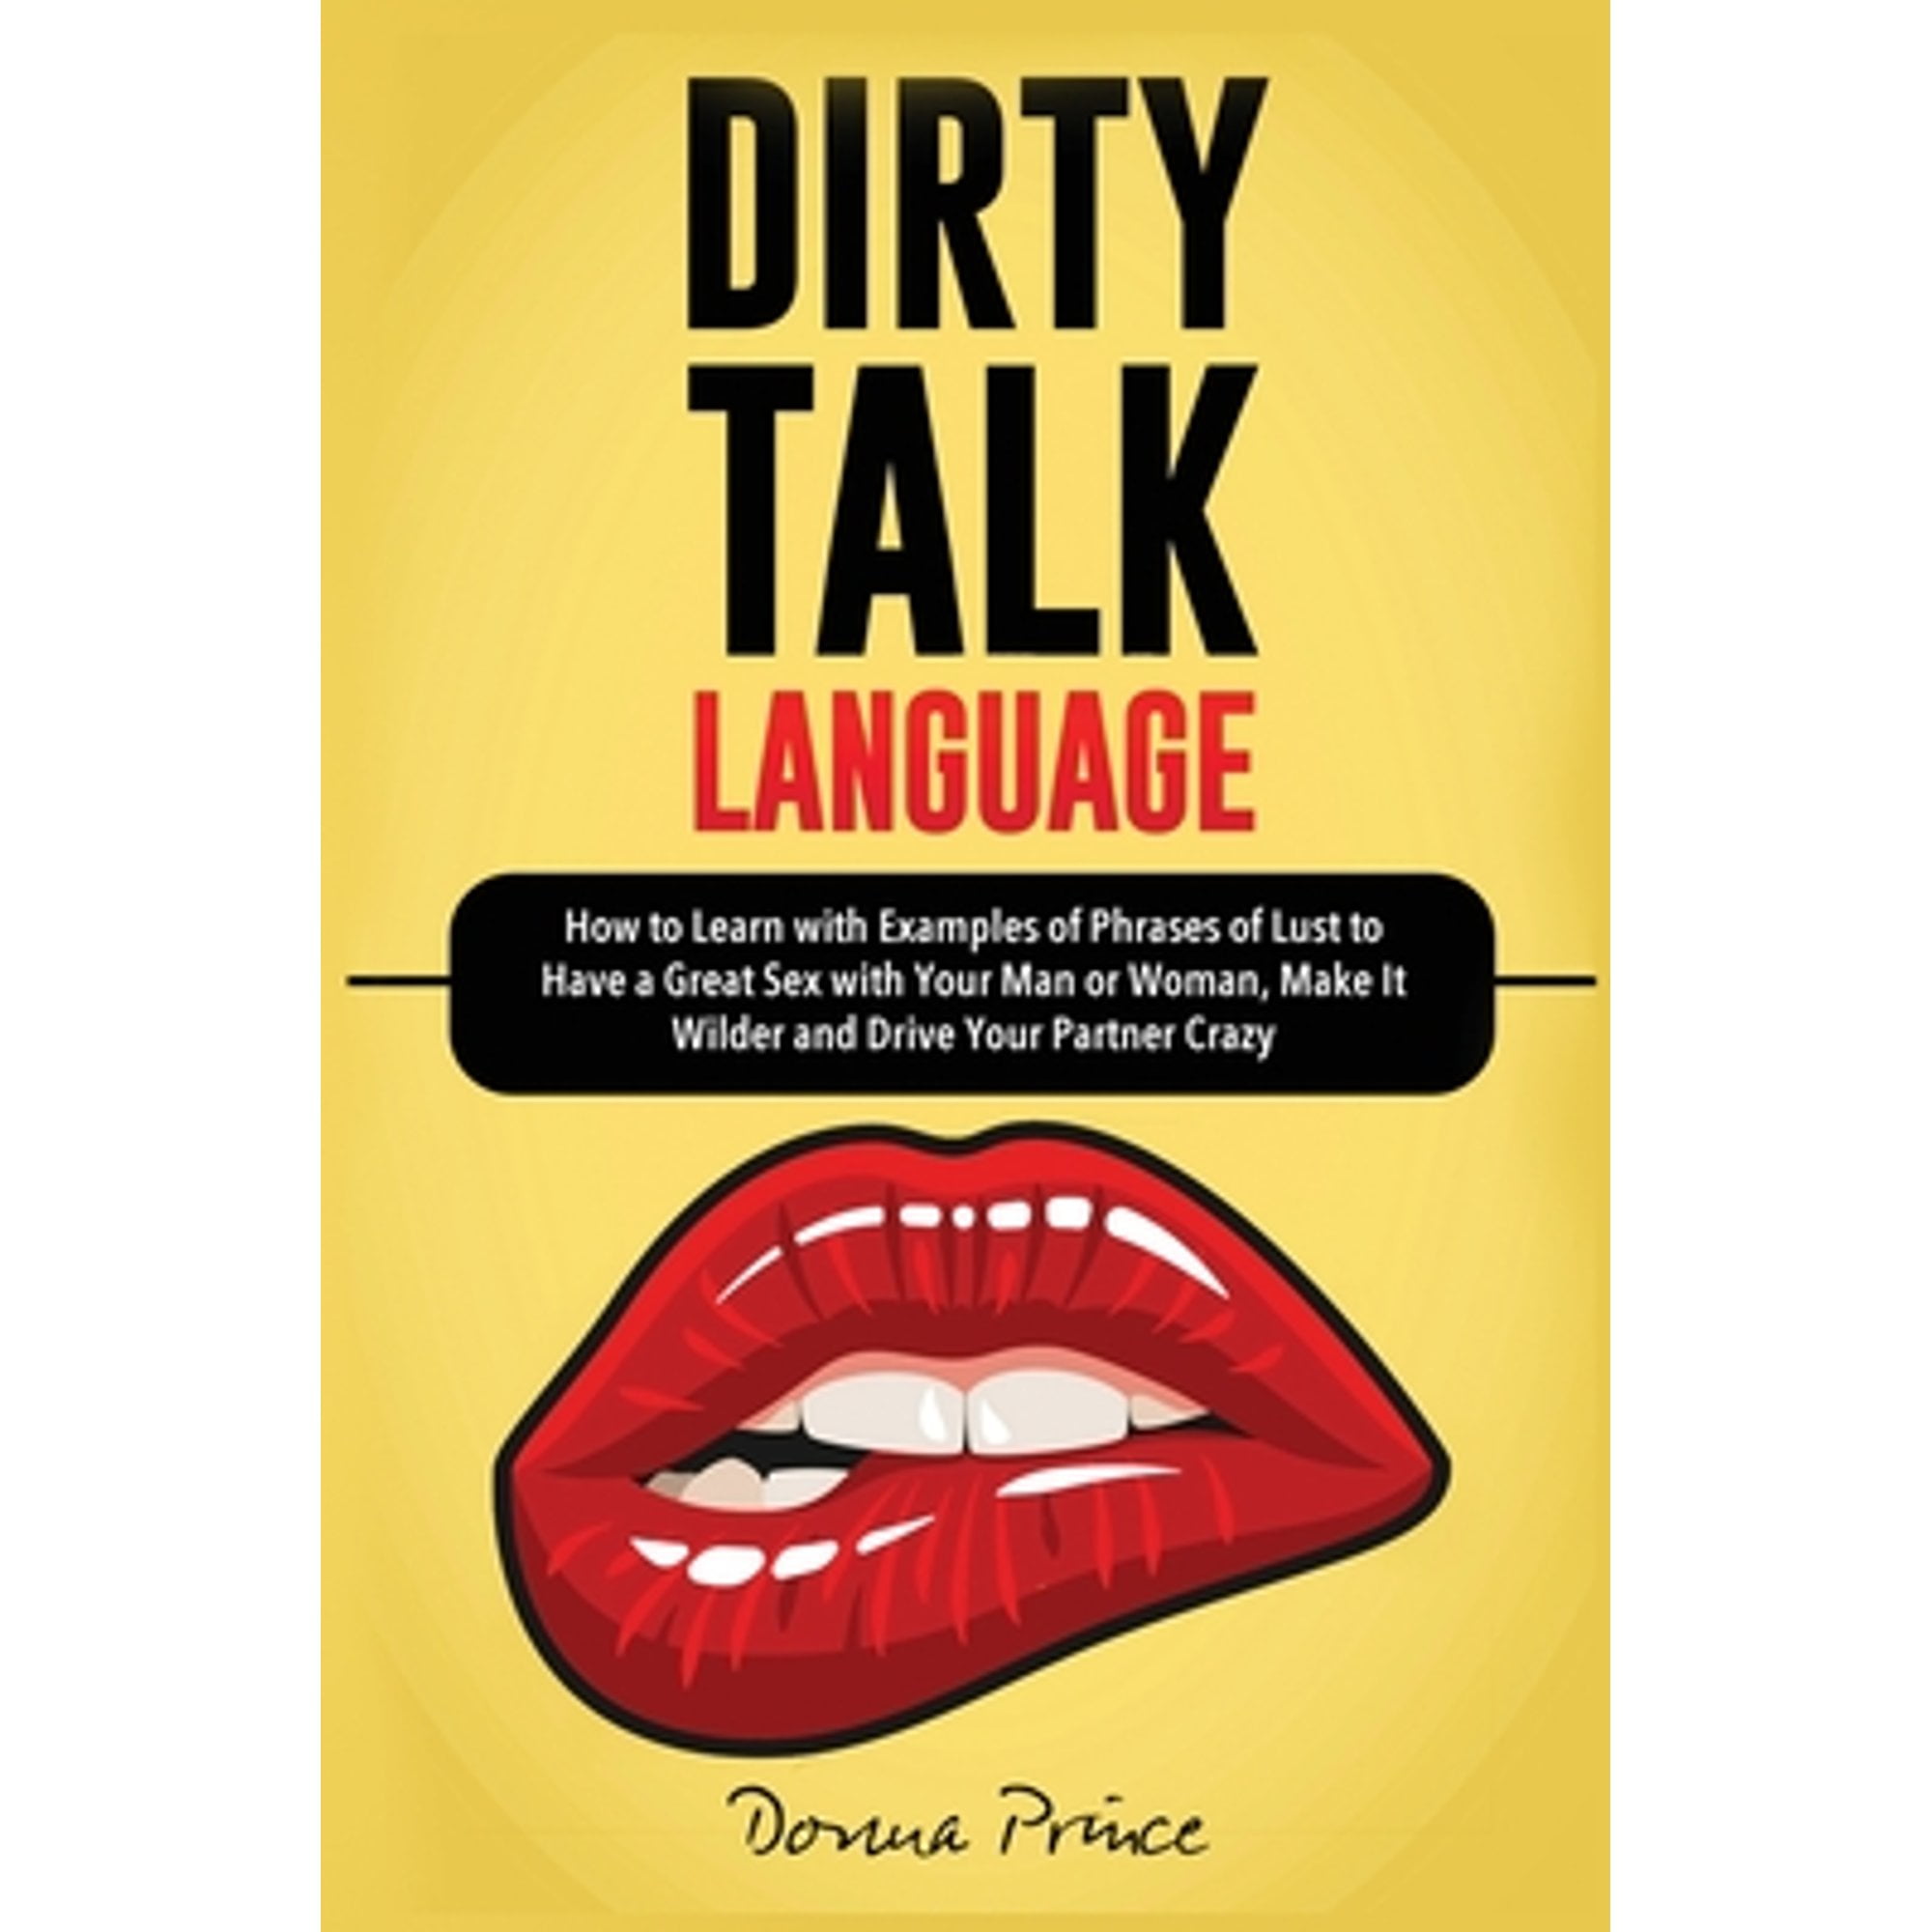 Sex Life Tips Dirty Talk Language How to Learn with Examples of Phrases of Lust to Have a Great Sex with Your Man or Woman, Make it Wilder and Drive Your